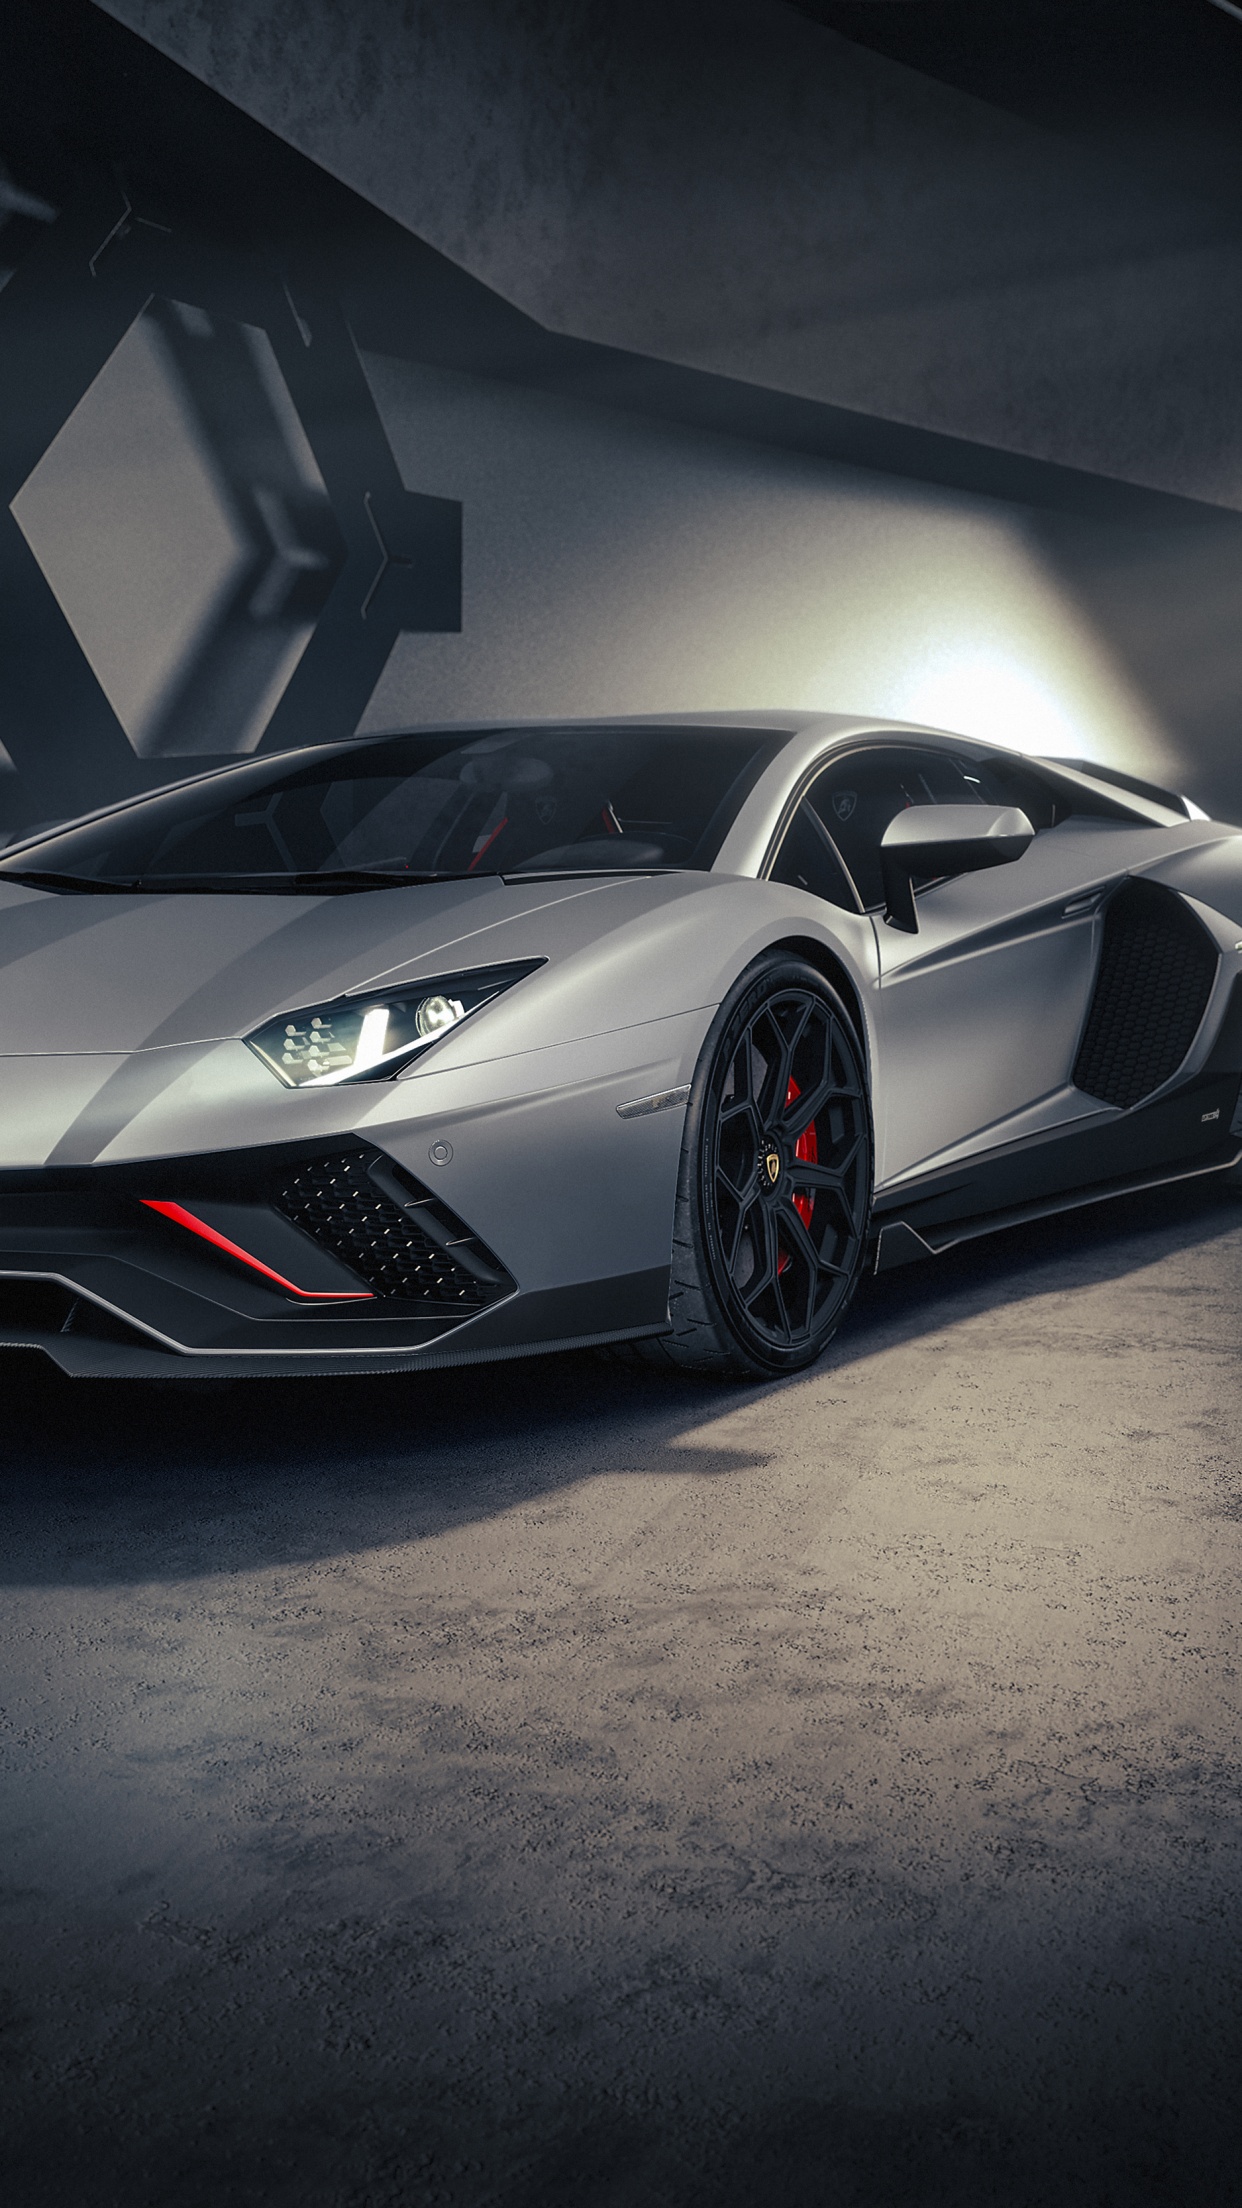 Premium AI Image  Lamborghini huracan wallpapers and images for iphone xs  max and iphone xs max wallpapers and images for iphone xs max wallpaper iphone  wallpaper